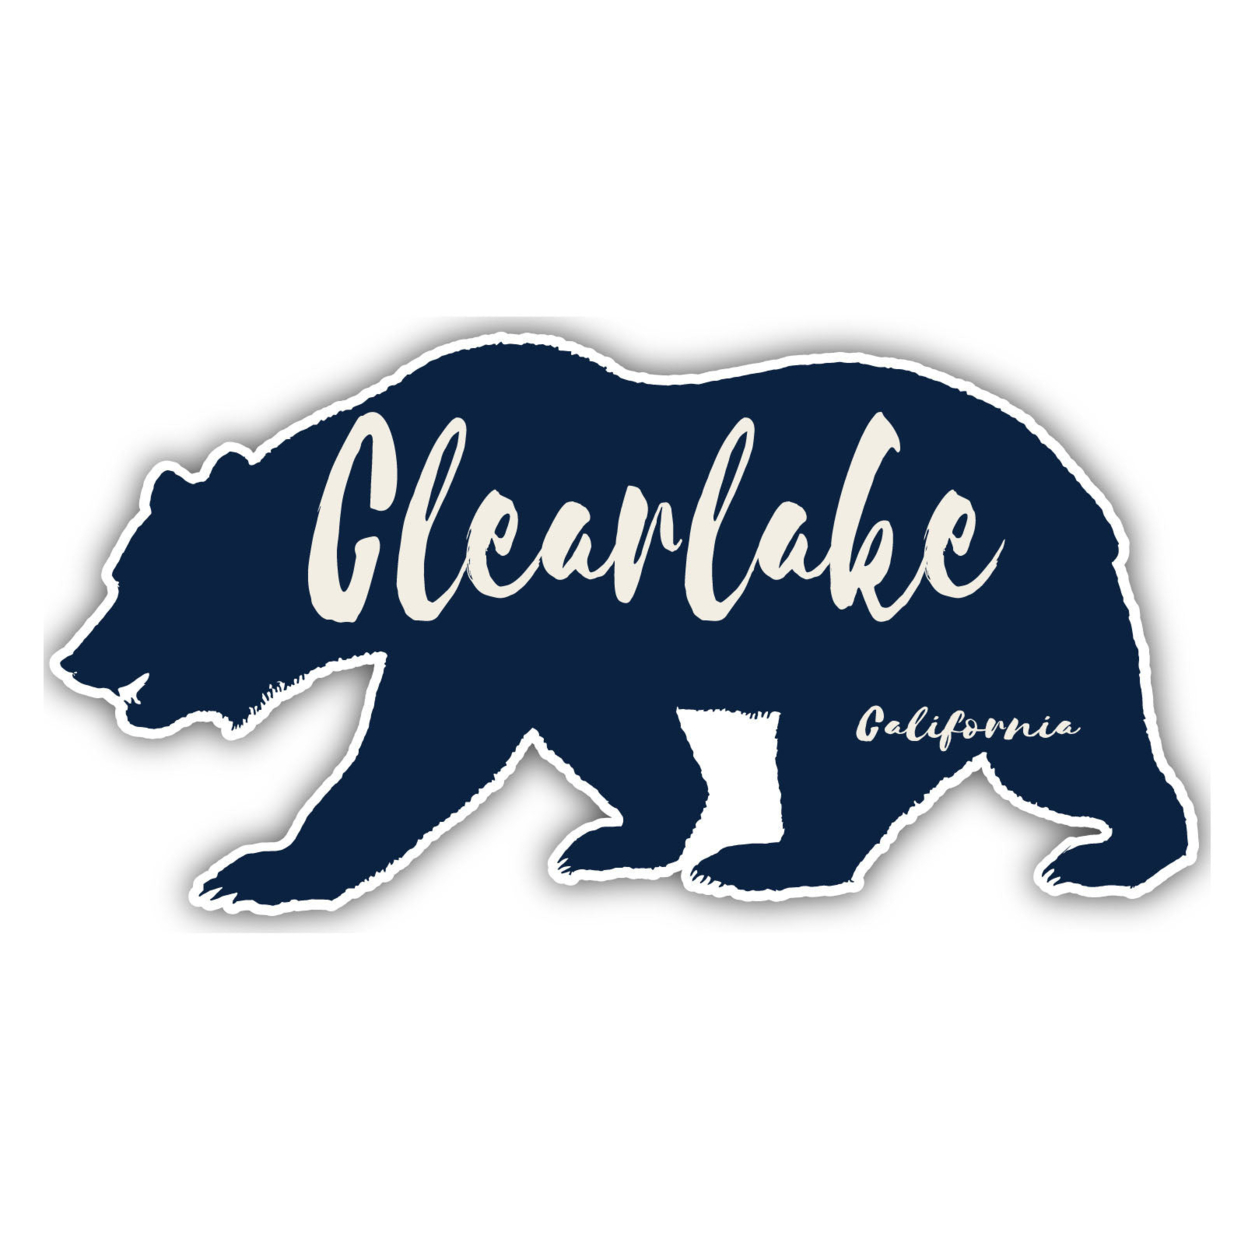 Clearlake California Souvenir Decorative Stickers (Choose Theme And Size) - Single Unit, 6-Inch, Camp Life